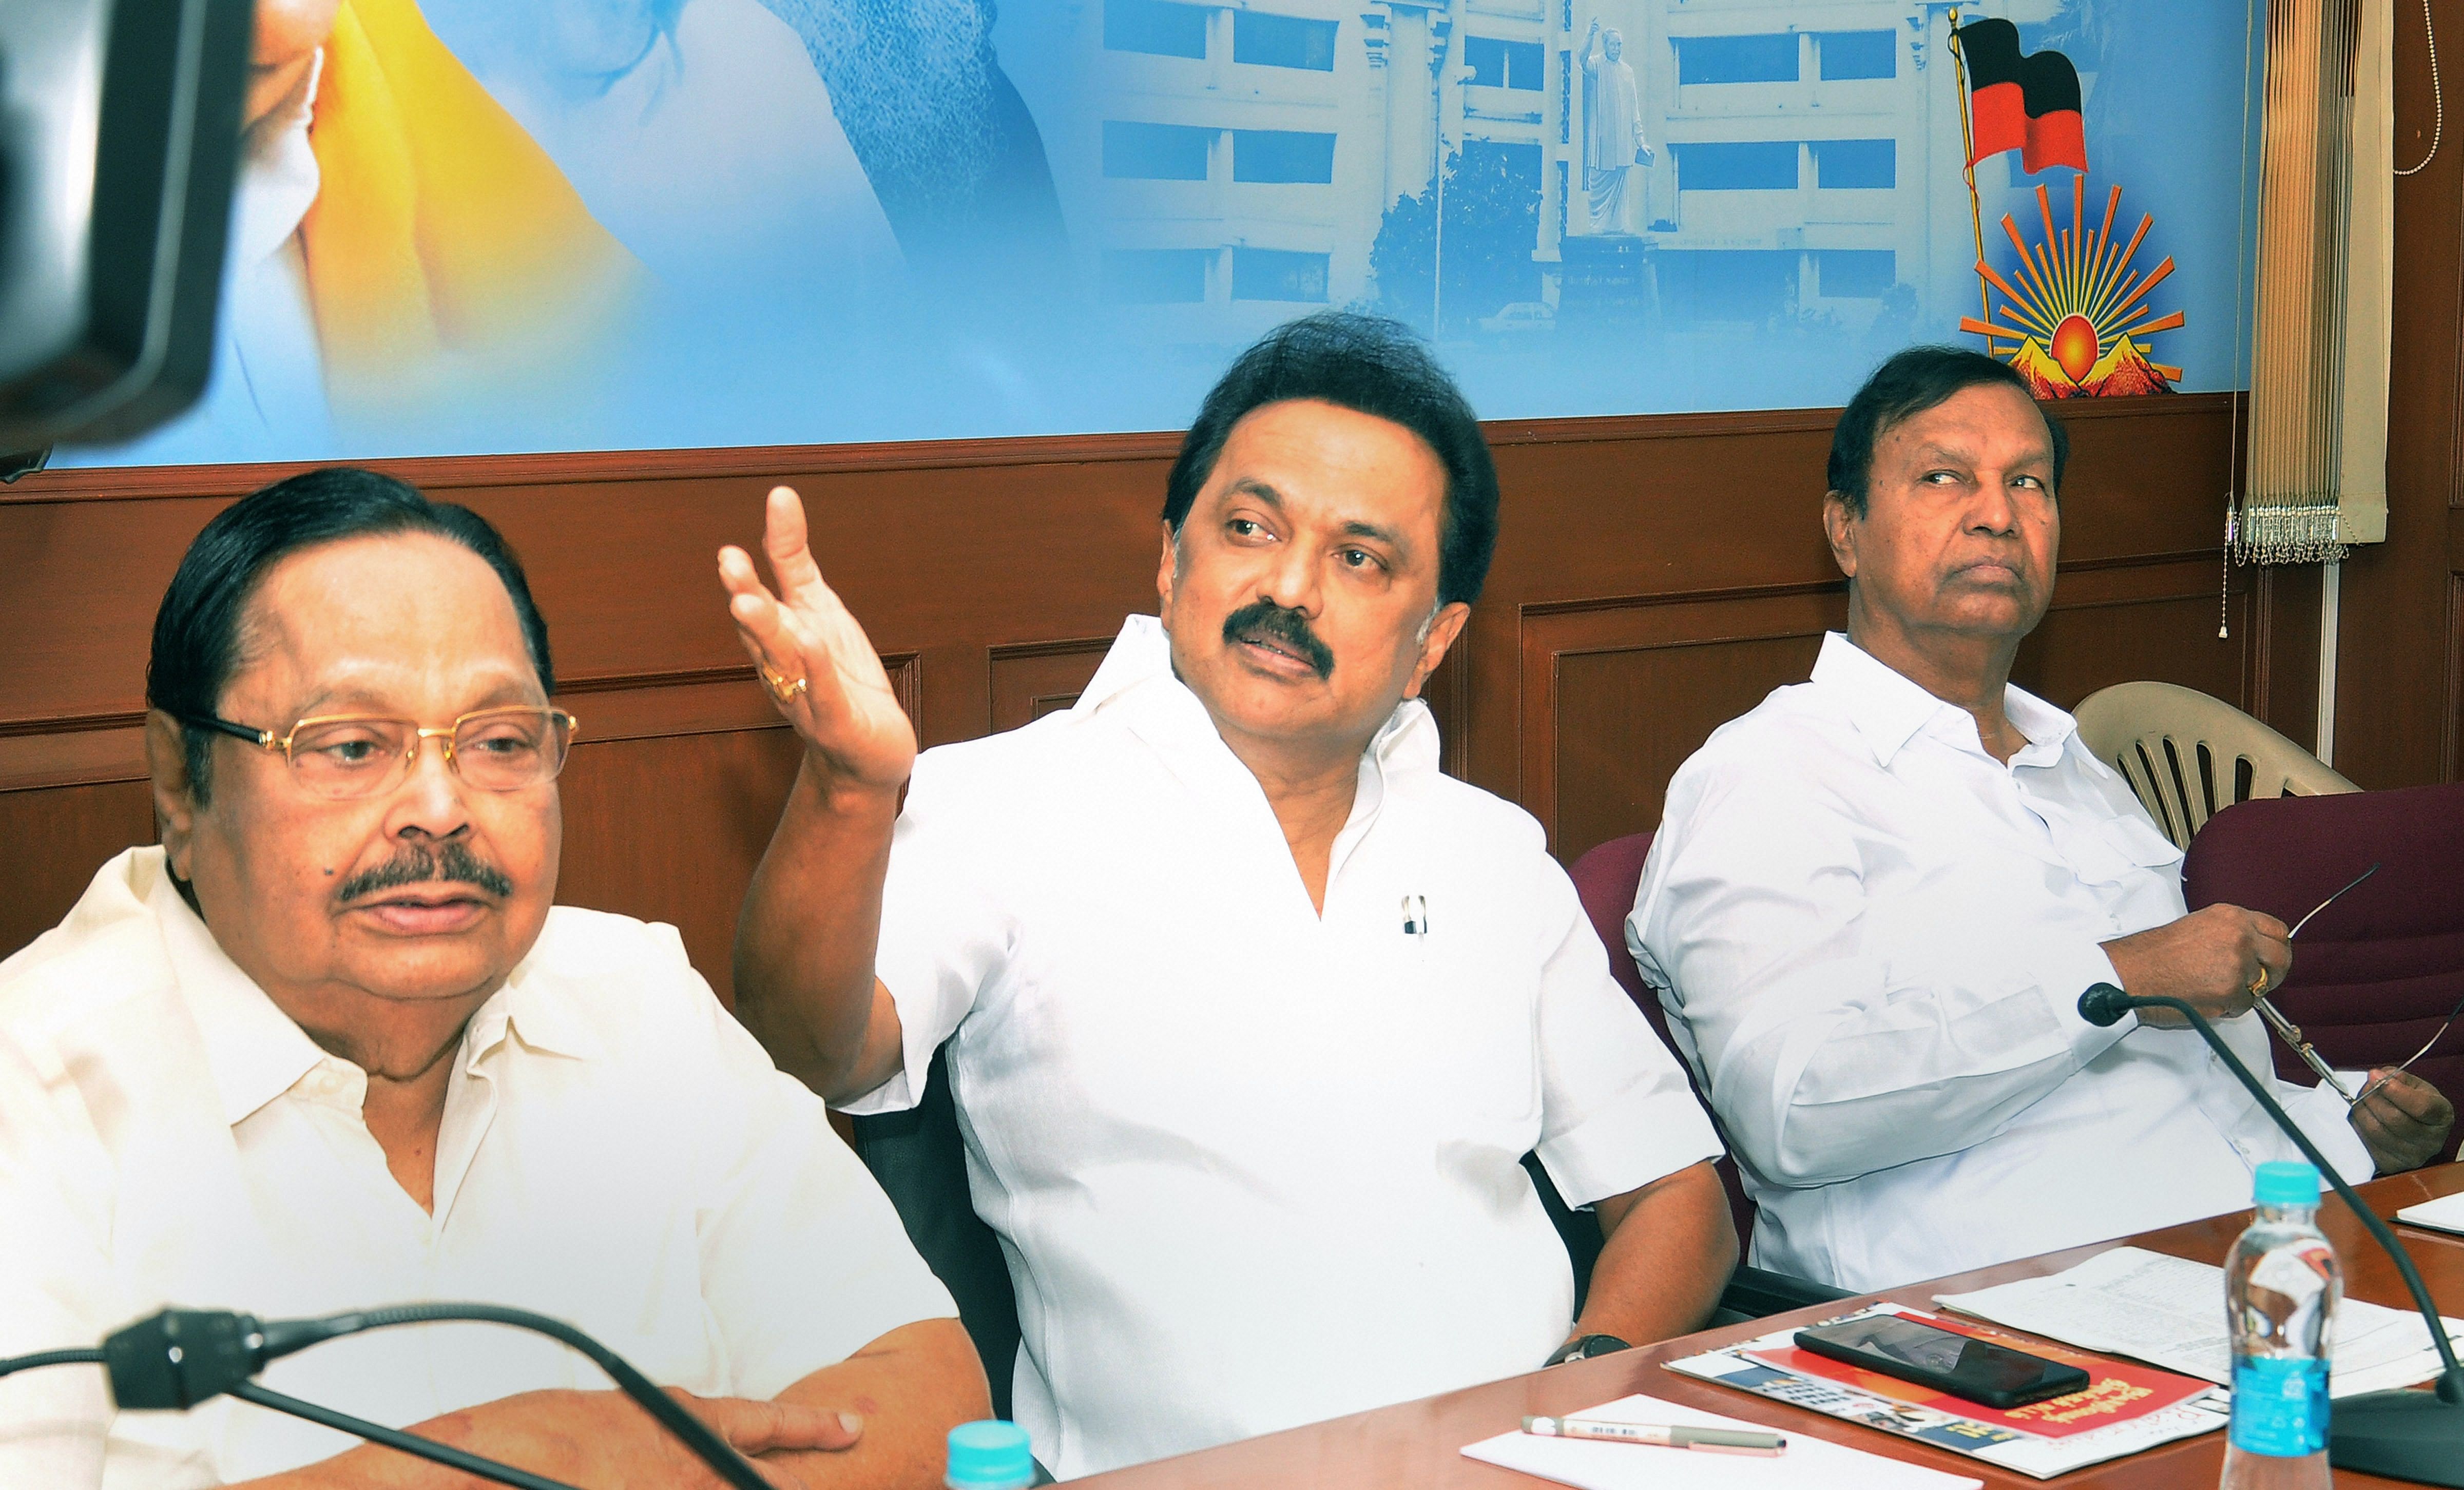 DMK President M K Stalin (C), party leader TR Baalu (L) and Durai Murgan during a meeting with alliance party leaders on the Citizenship Amendment Act (CAA), in Chennai. (PTI Photo)